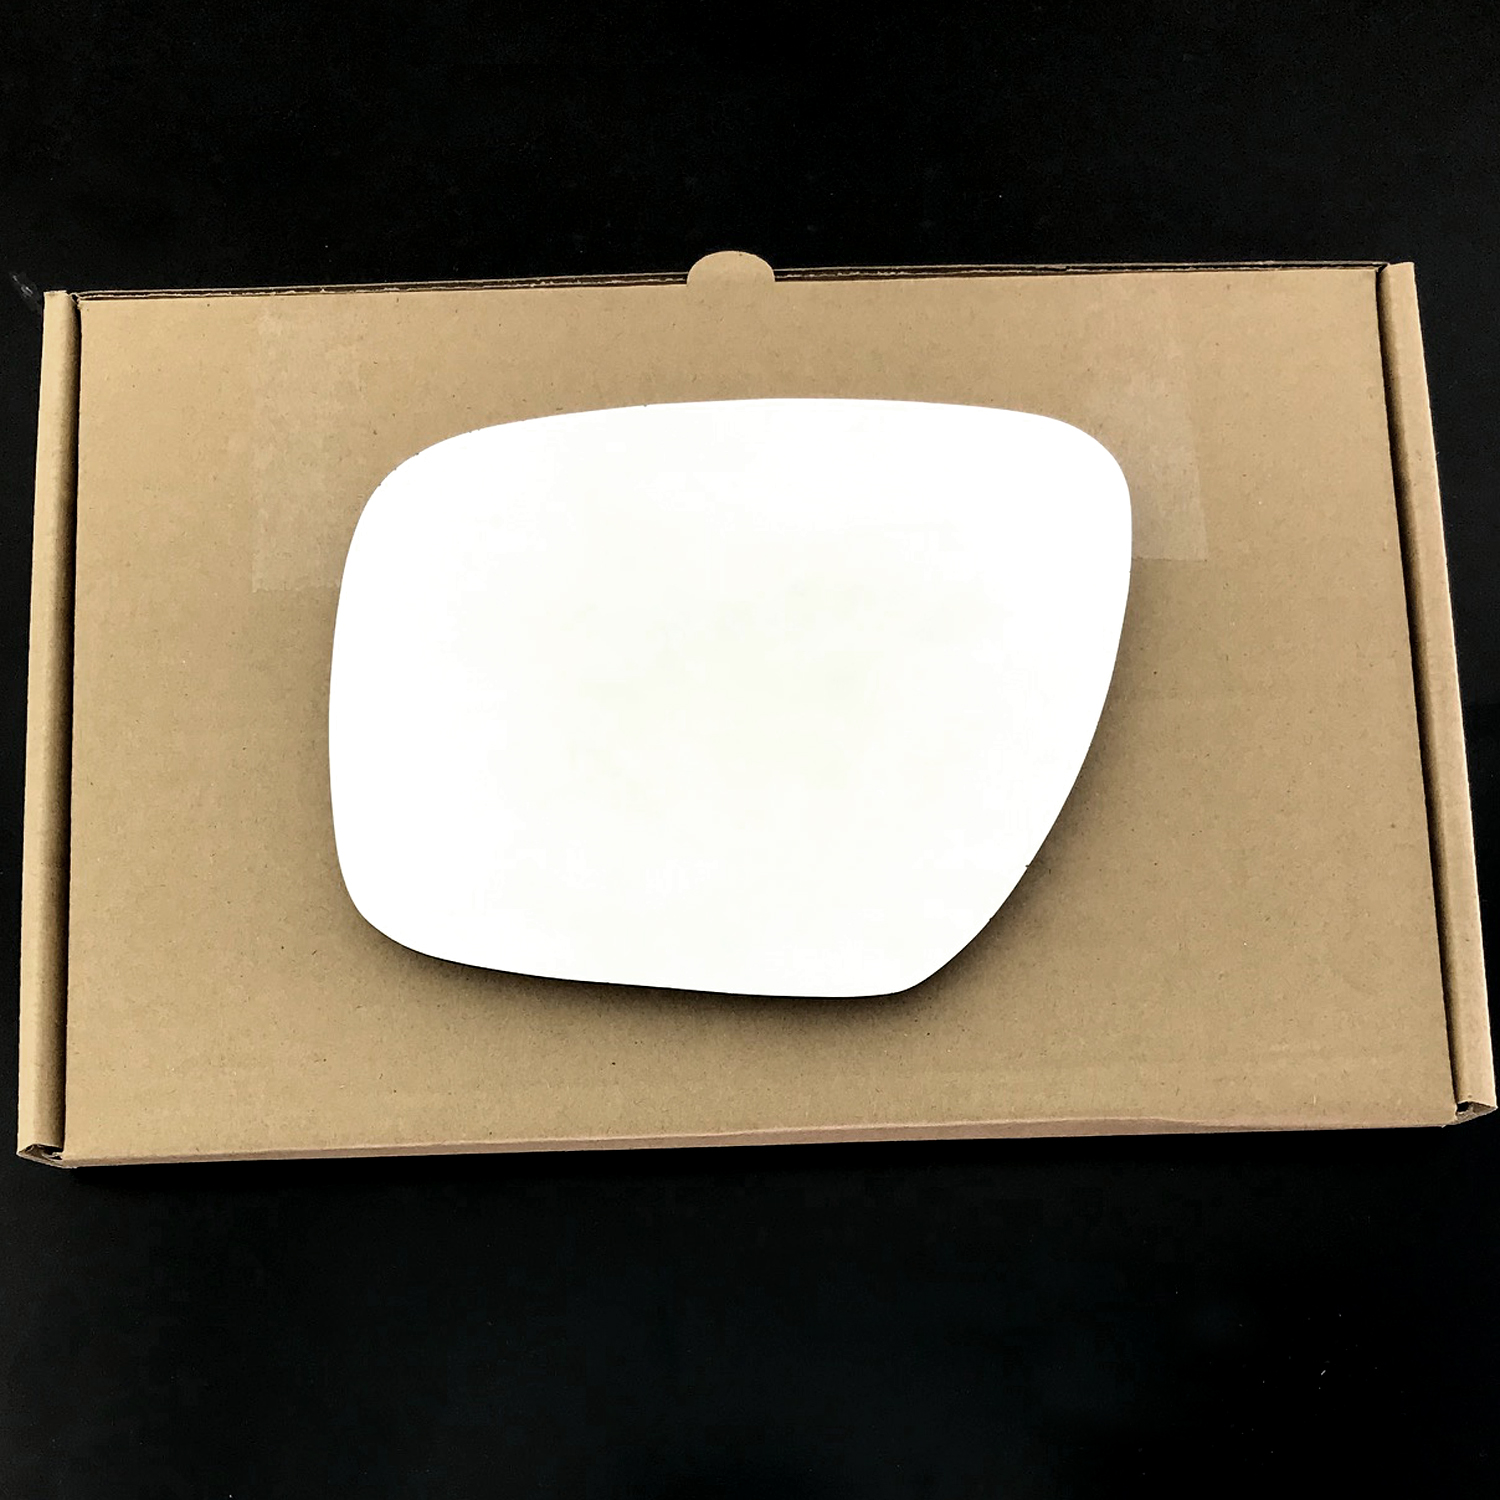 Mazda 5 Wing Mirror Glass LEFT HAND ( UK Passenger Side ) 2005 to 2010 – Convex Wing Mirror